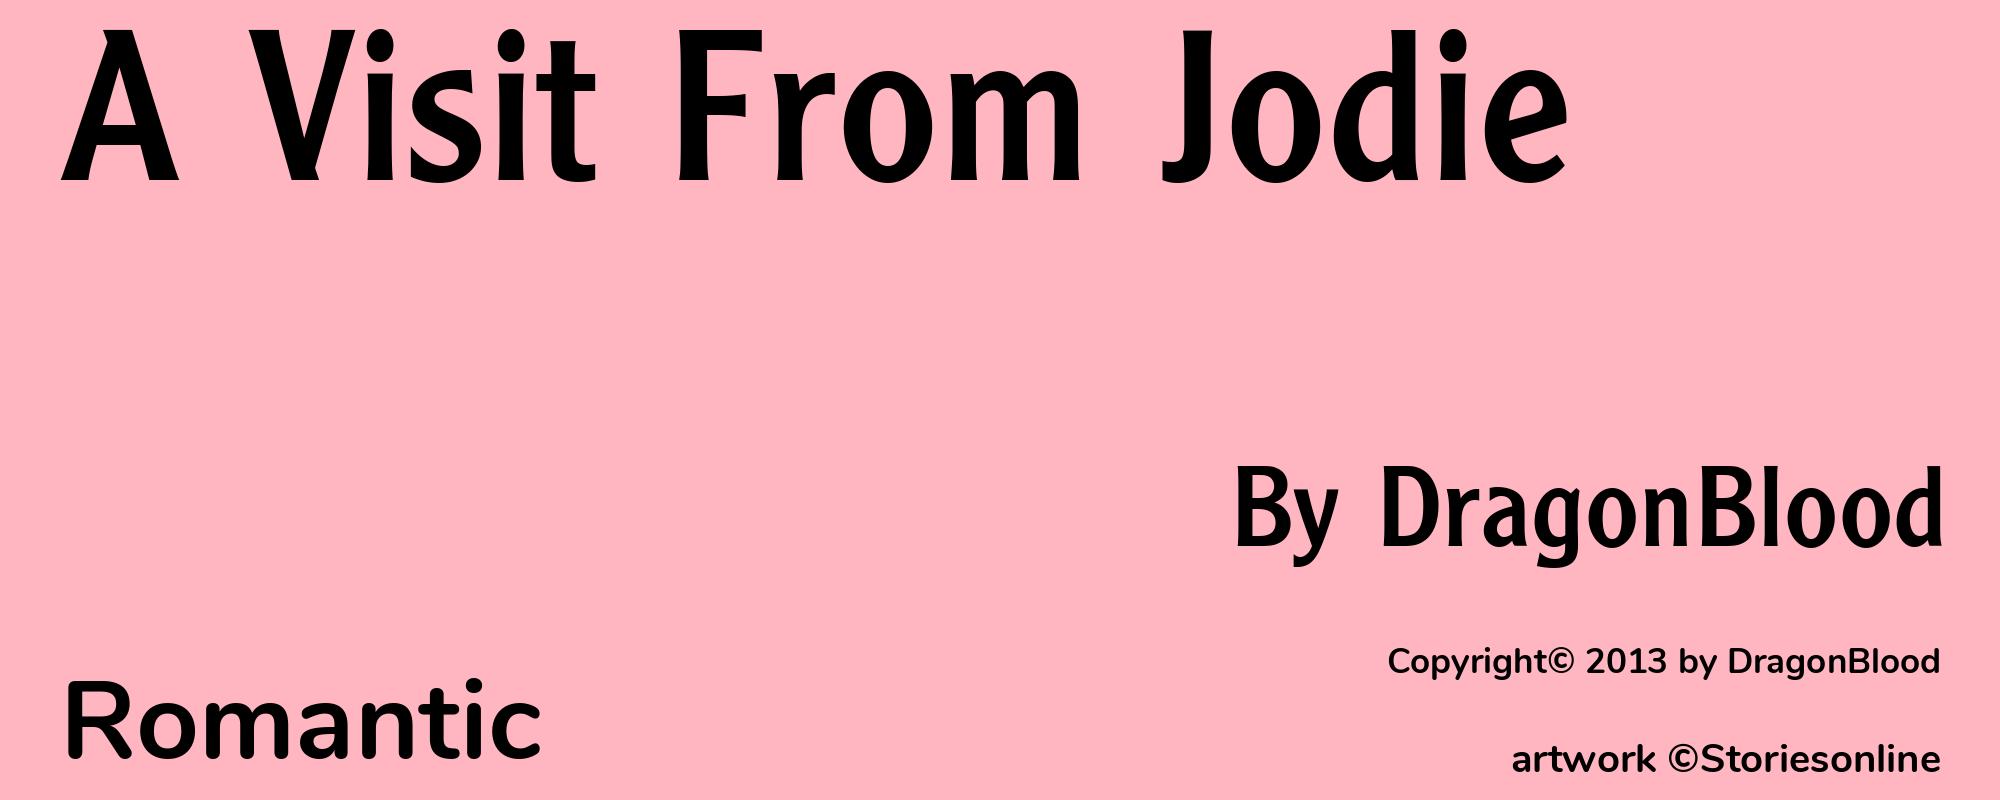 A Visit From Jodie - Cover